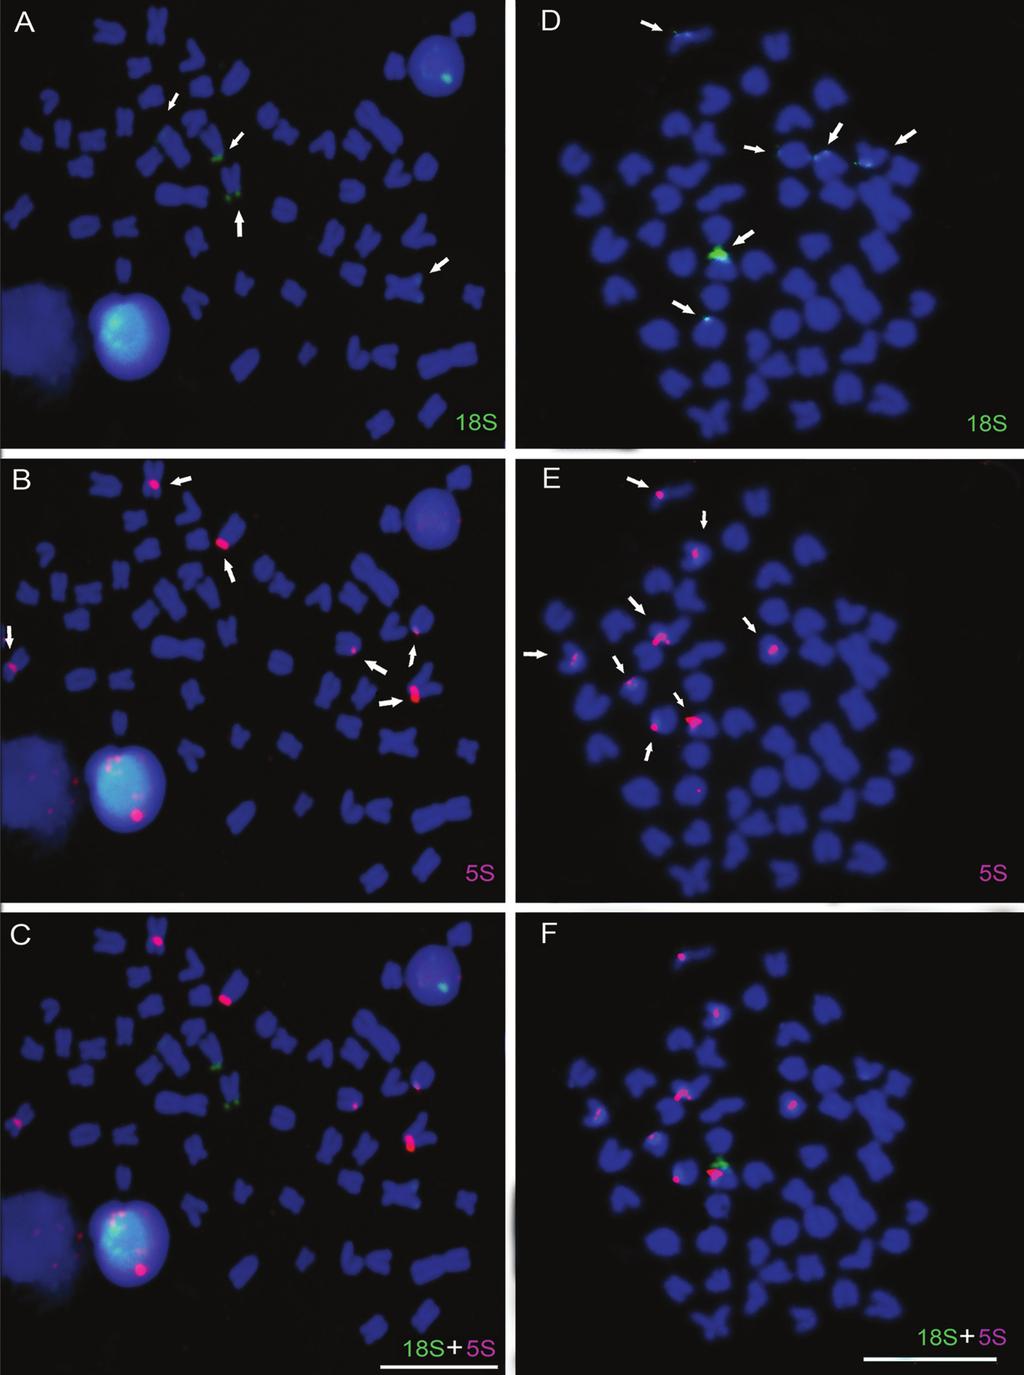 436 Speciation in Astyanax scabripinnis species complex Fig. 7. Fluorescence in situ hybridization with 18S rdna (A and D) and 5S rdna (B and E) probes. Overlapping of images (C and F).